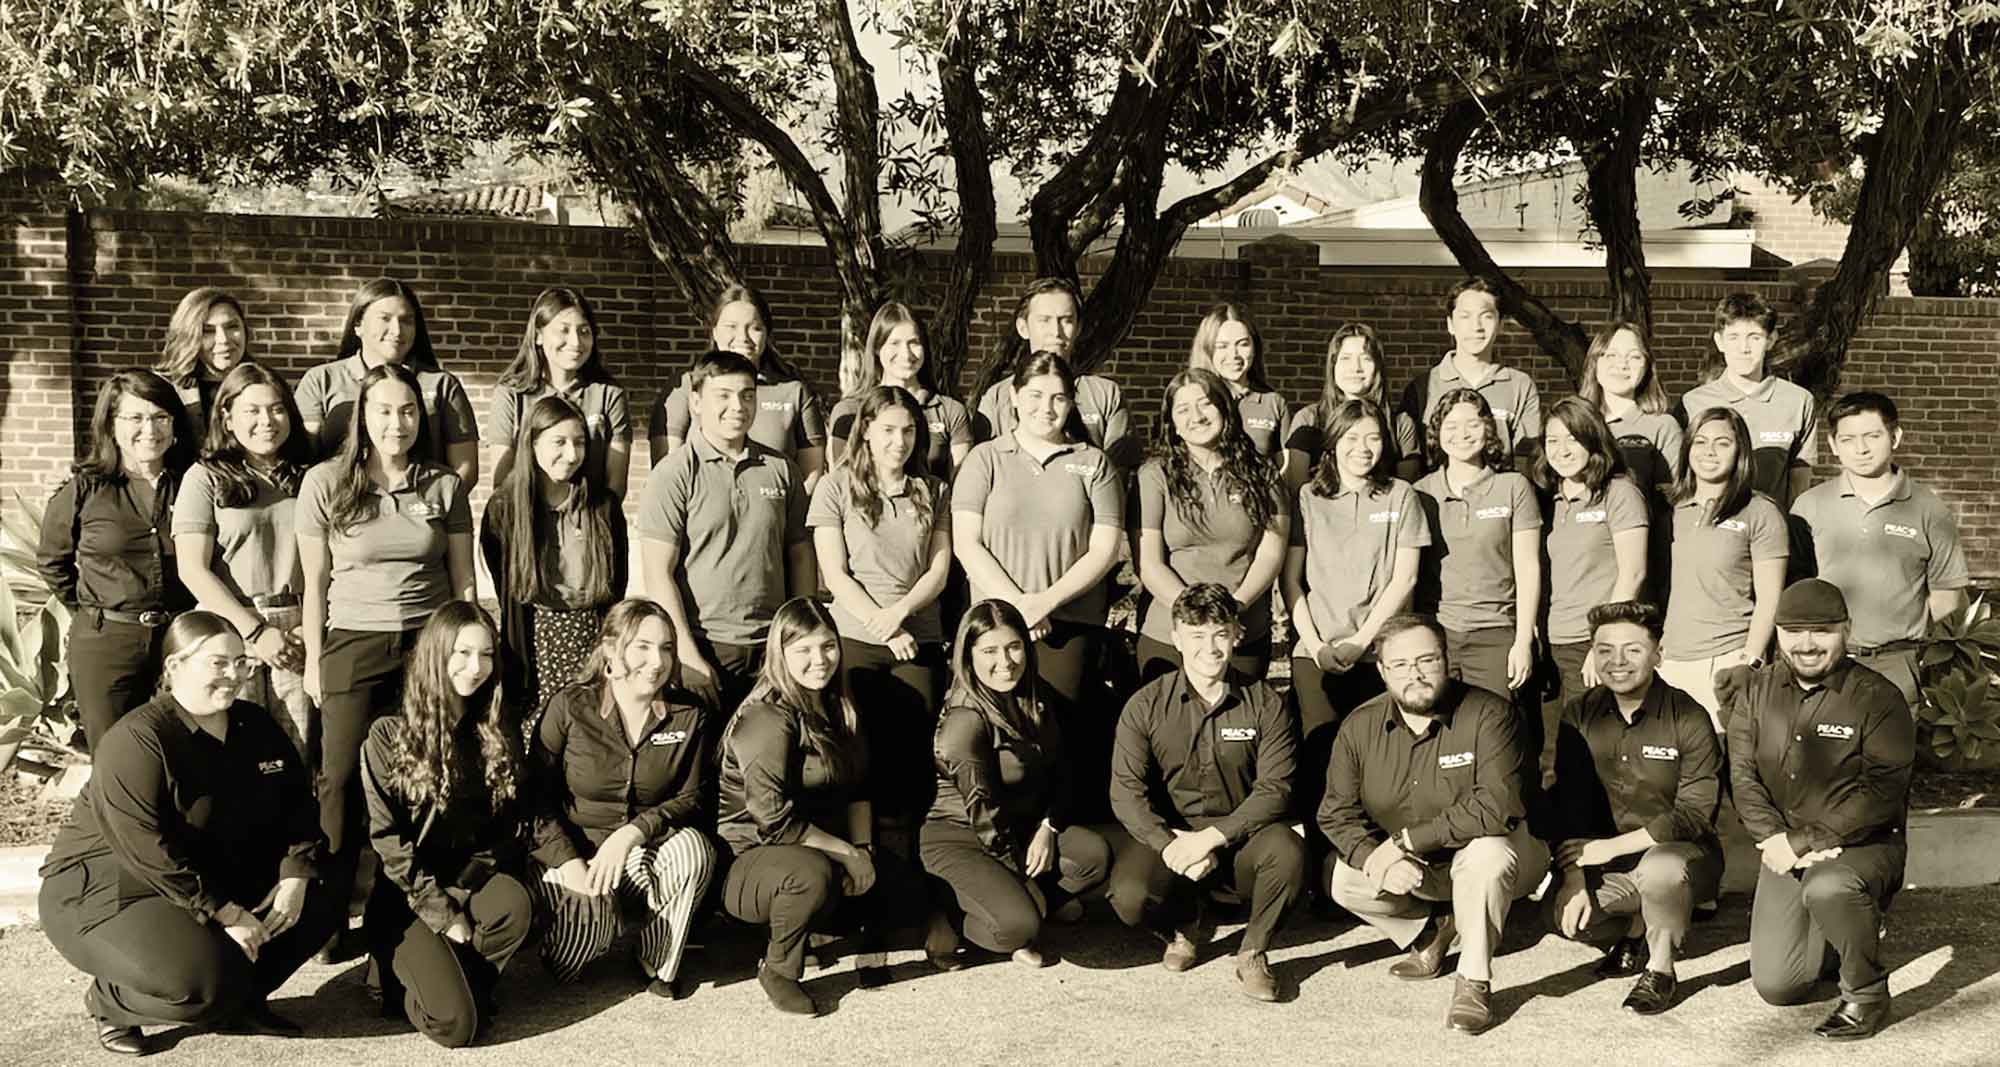 Landscape photograph of some Santa Barbara Unified teachers, administrators, and students smiling and posing together for a picture outside nearby a few trees and a brick wall